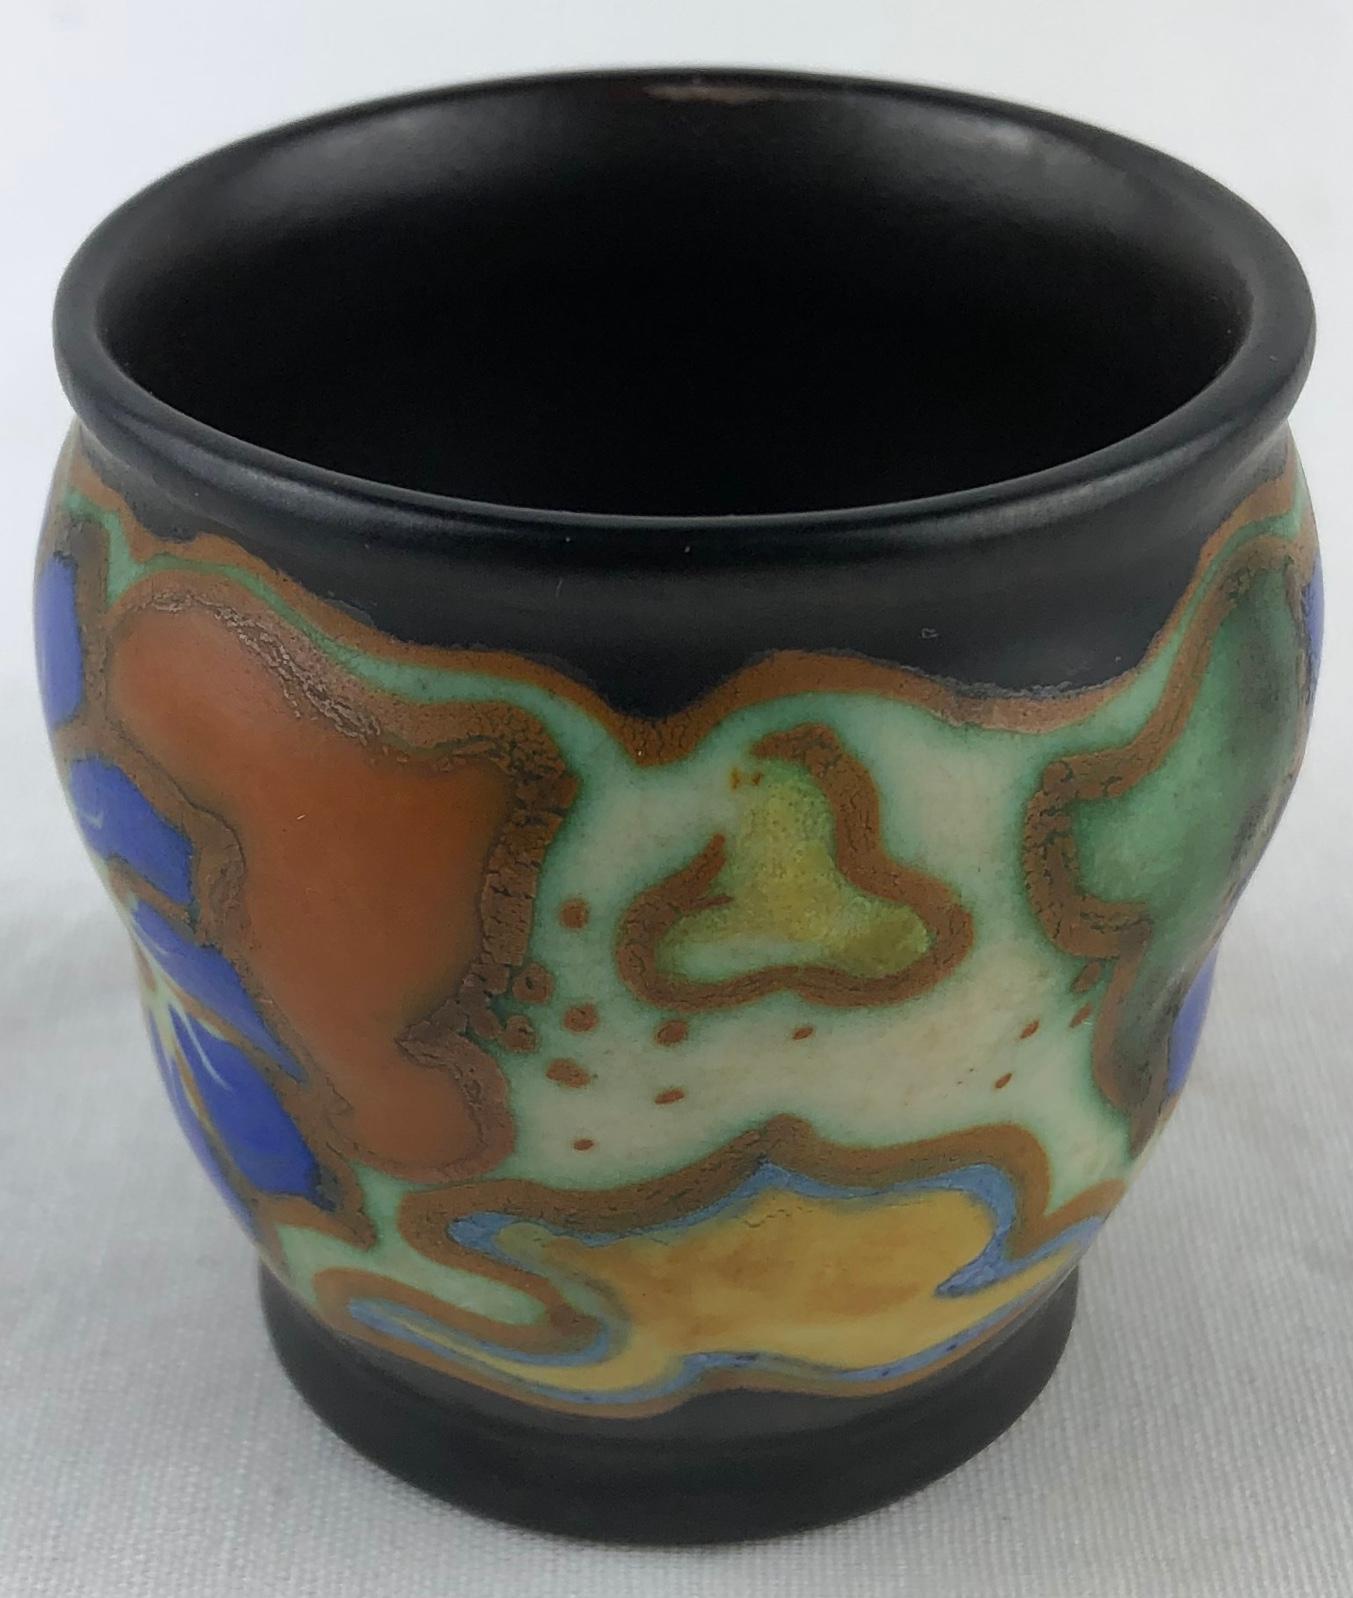 Dutch Art Deco ceramic cup or pen/pencil holder from Gouda, Holland with traditional period flowery and curvaceous designs, circa 1920s, matte glaze, which for us is the mixture of abstract and floral designs.

Very colorful and pleasing to the